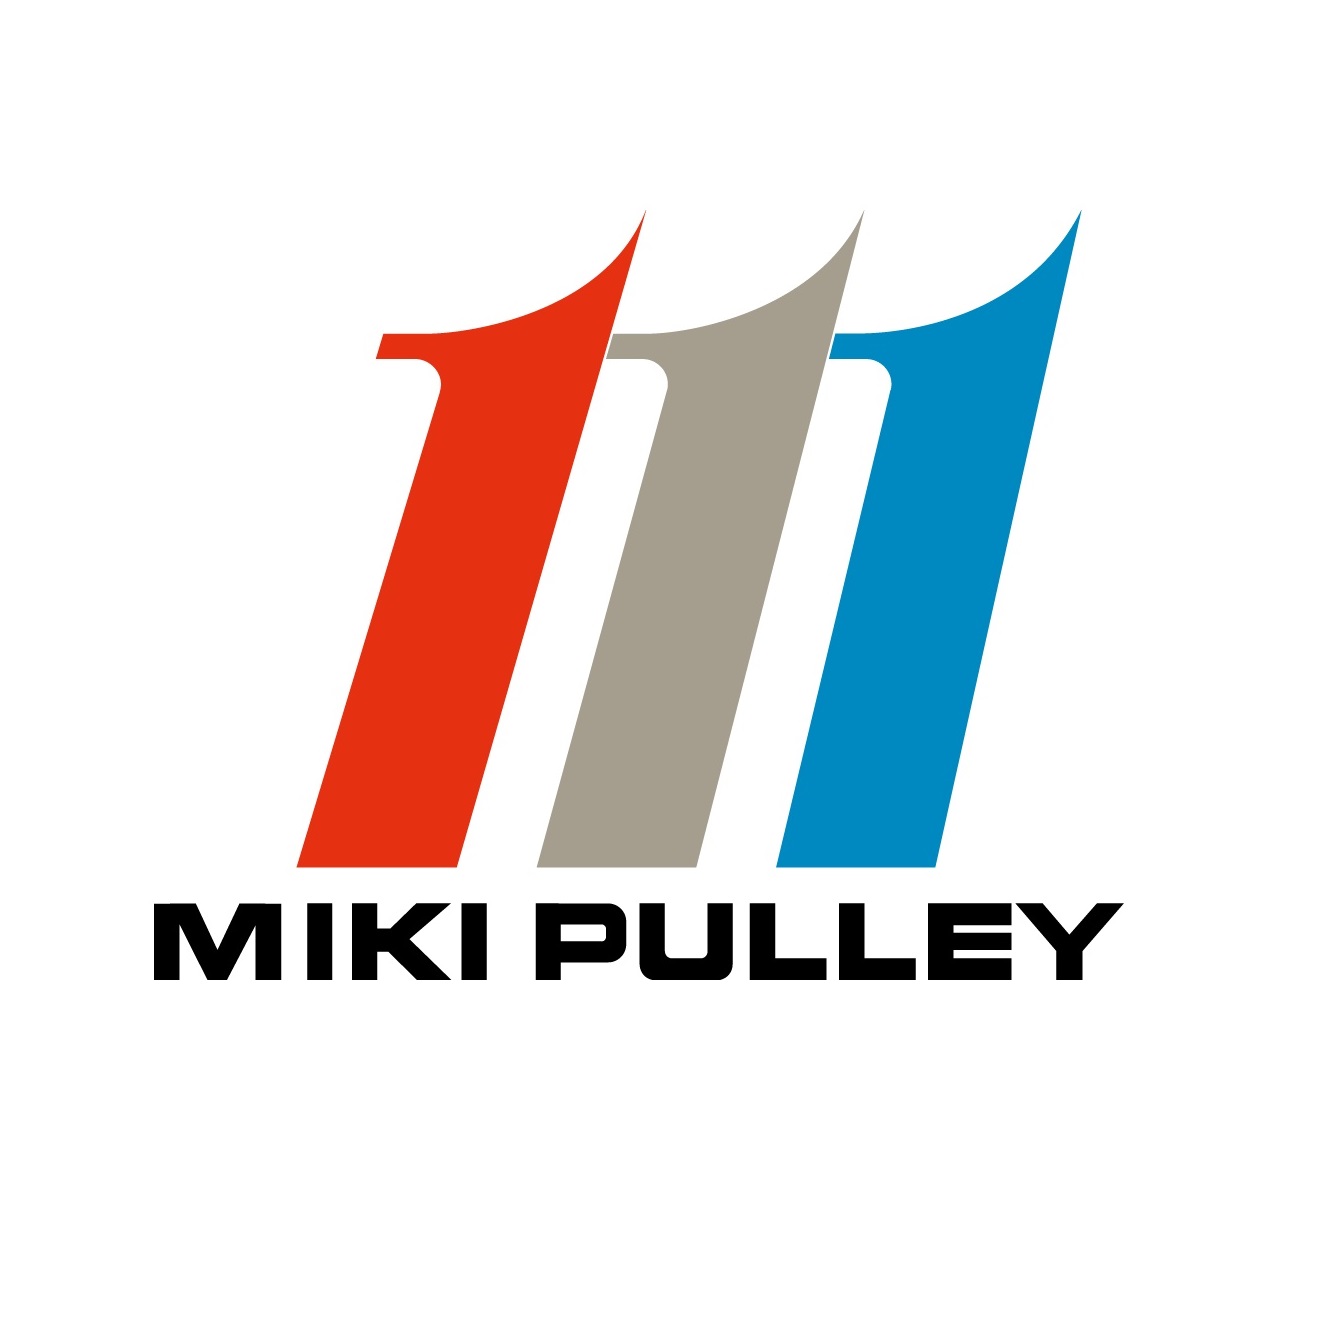 list-code-khop-noi-miki-pulley-1.png